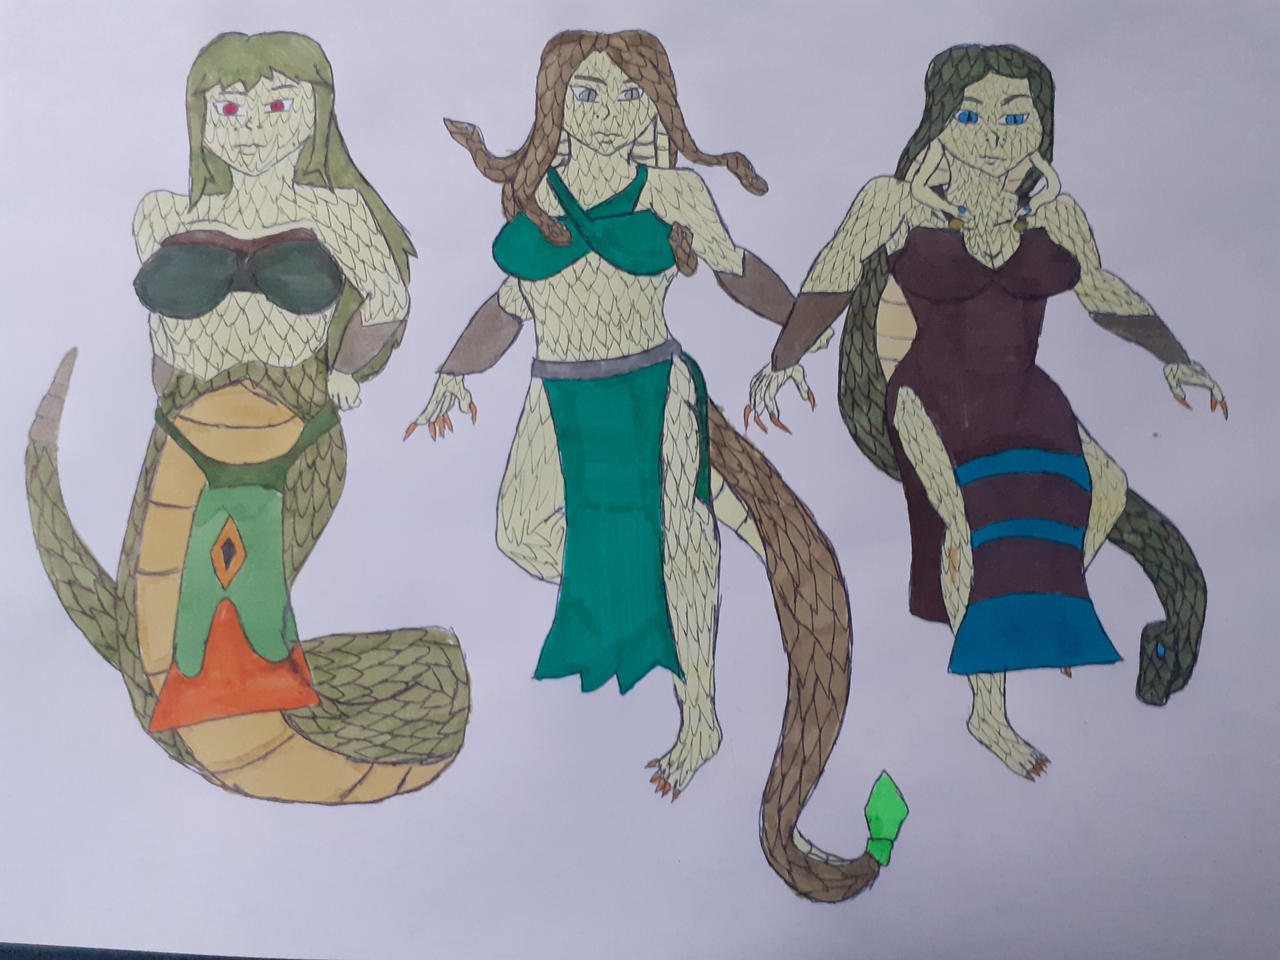 The three gorgon sister + big news in description by Scolopos on DeviantArt